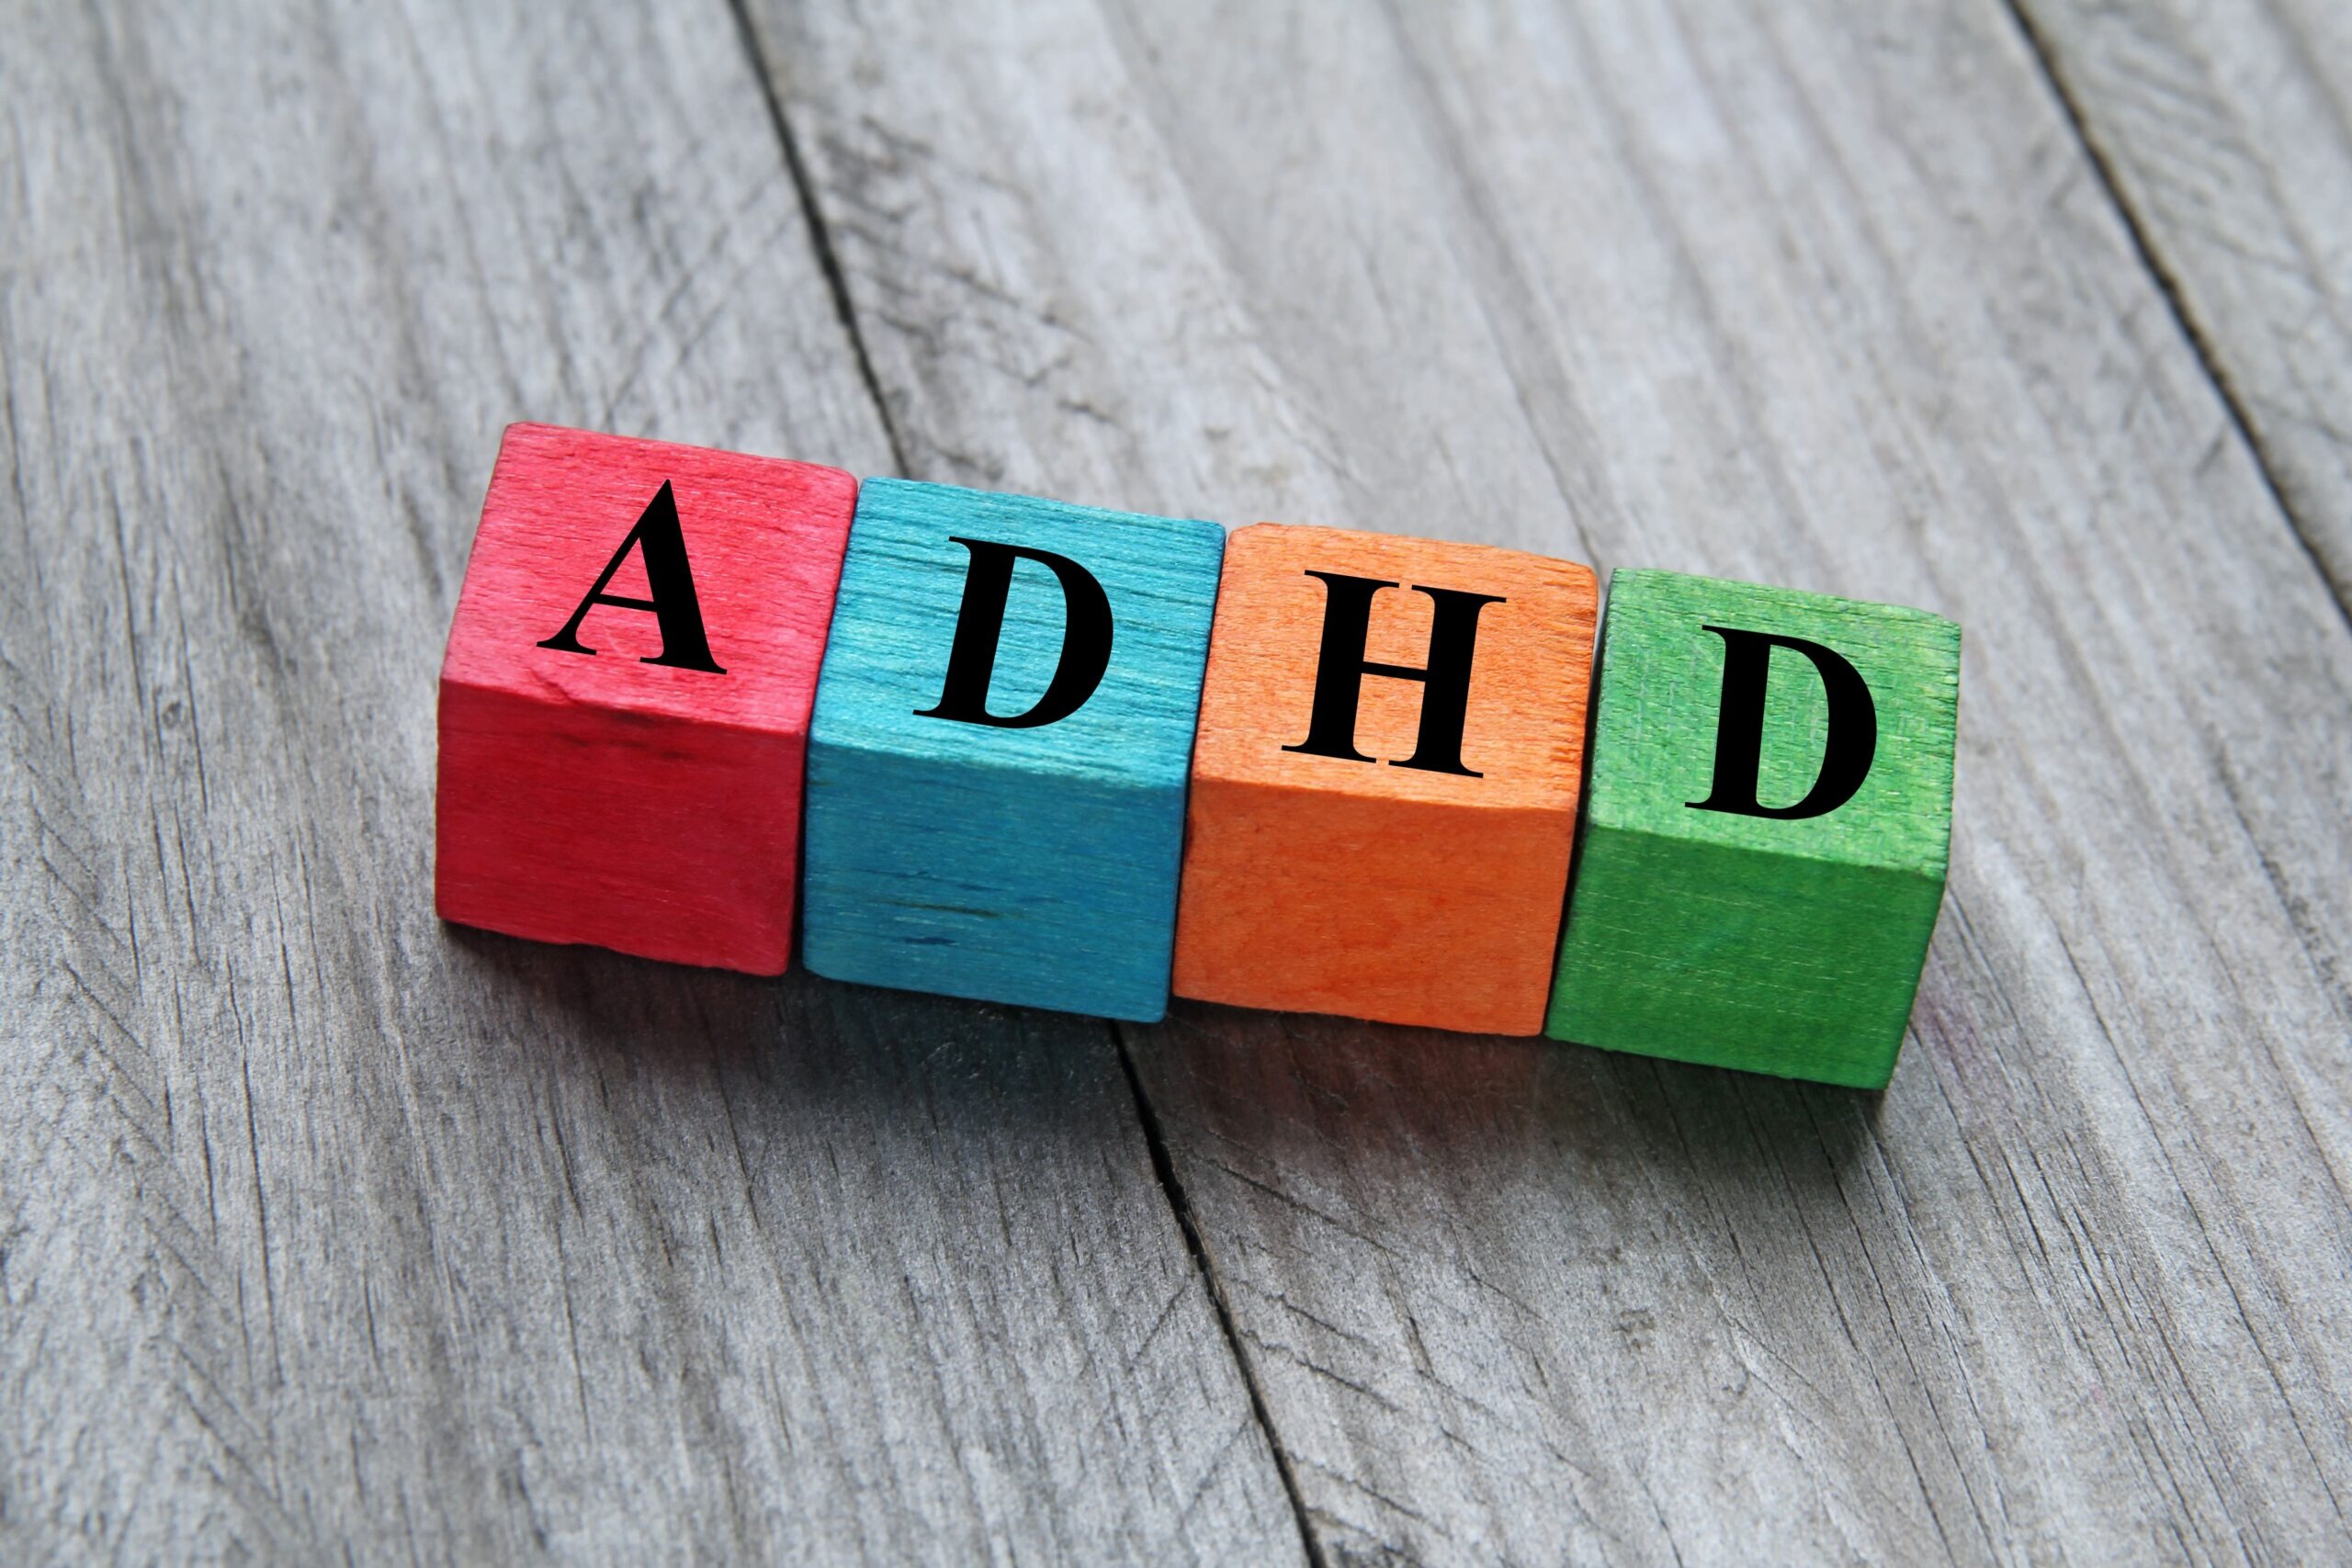 Is ADHD considered a mental health disorder?